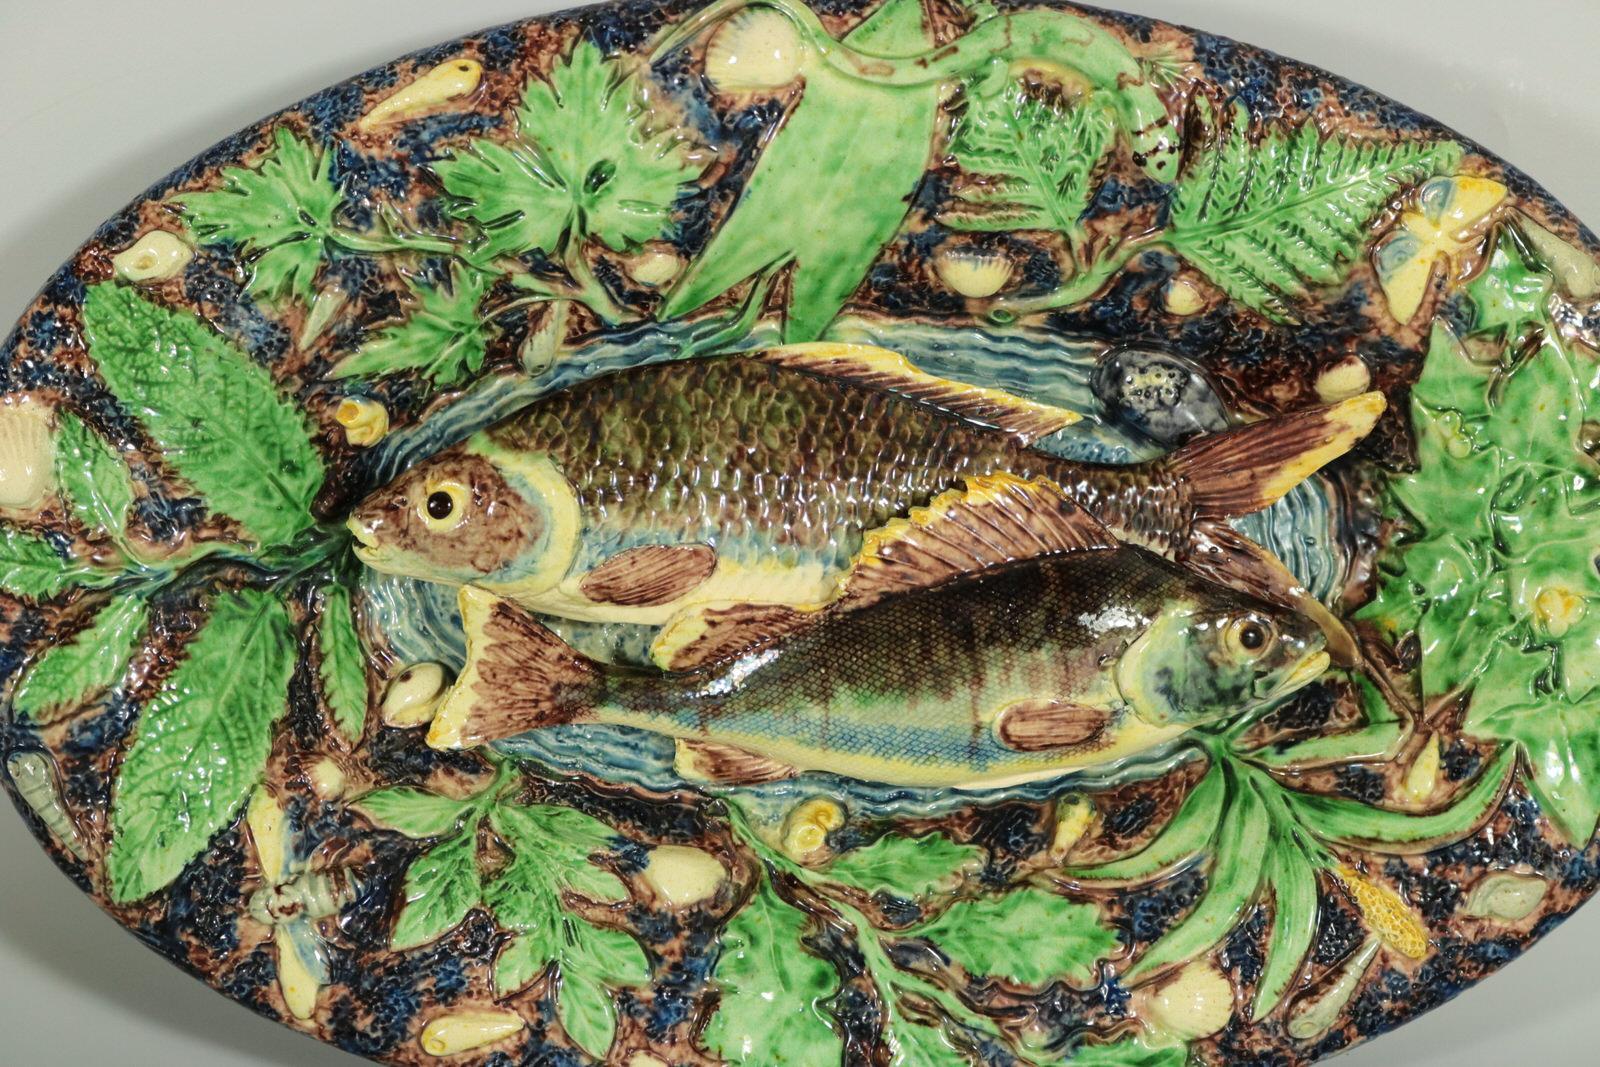 School of Paris French Palissy Majolica wall platter which features two overlapping fish on a water-effect ground, to the centre. A lizard, shellfish, insects and leaves around the rim. Coloration: Green, blue, brown, are predominant. Attribution,